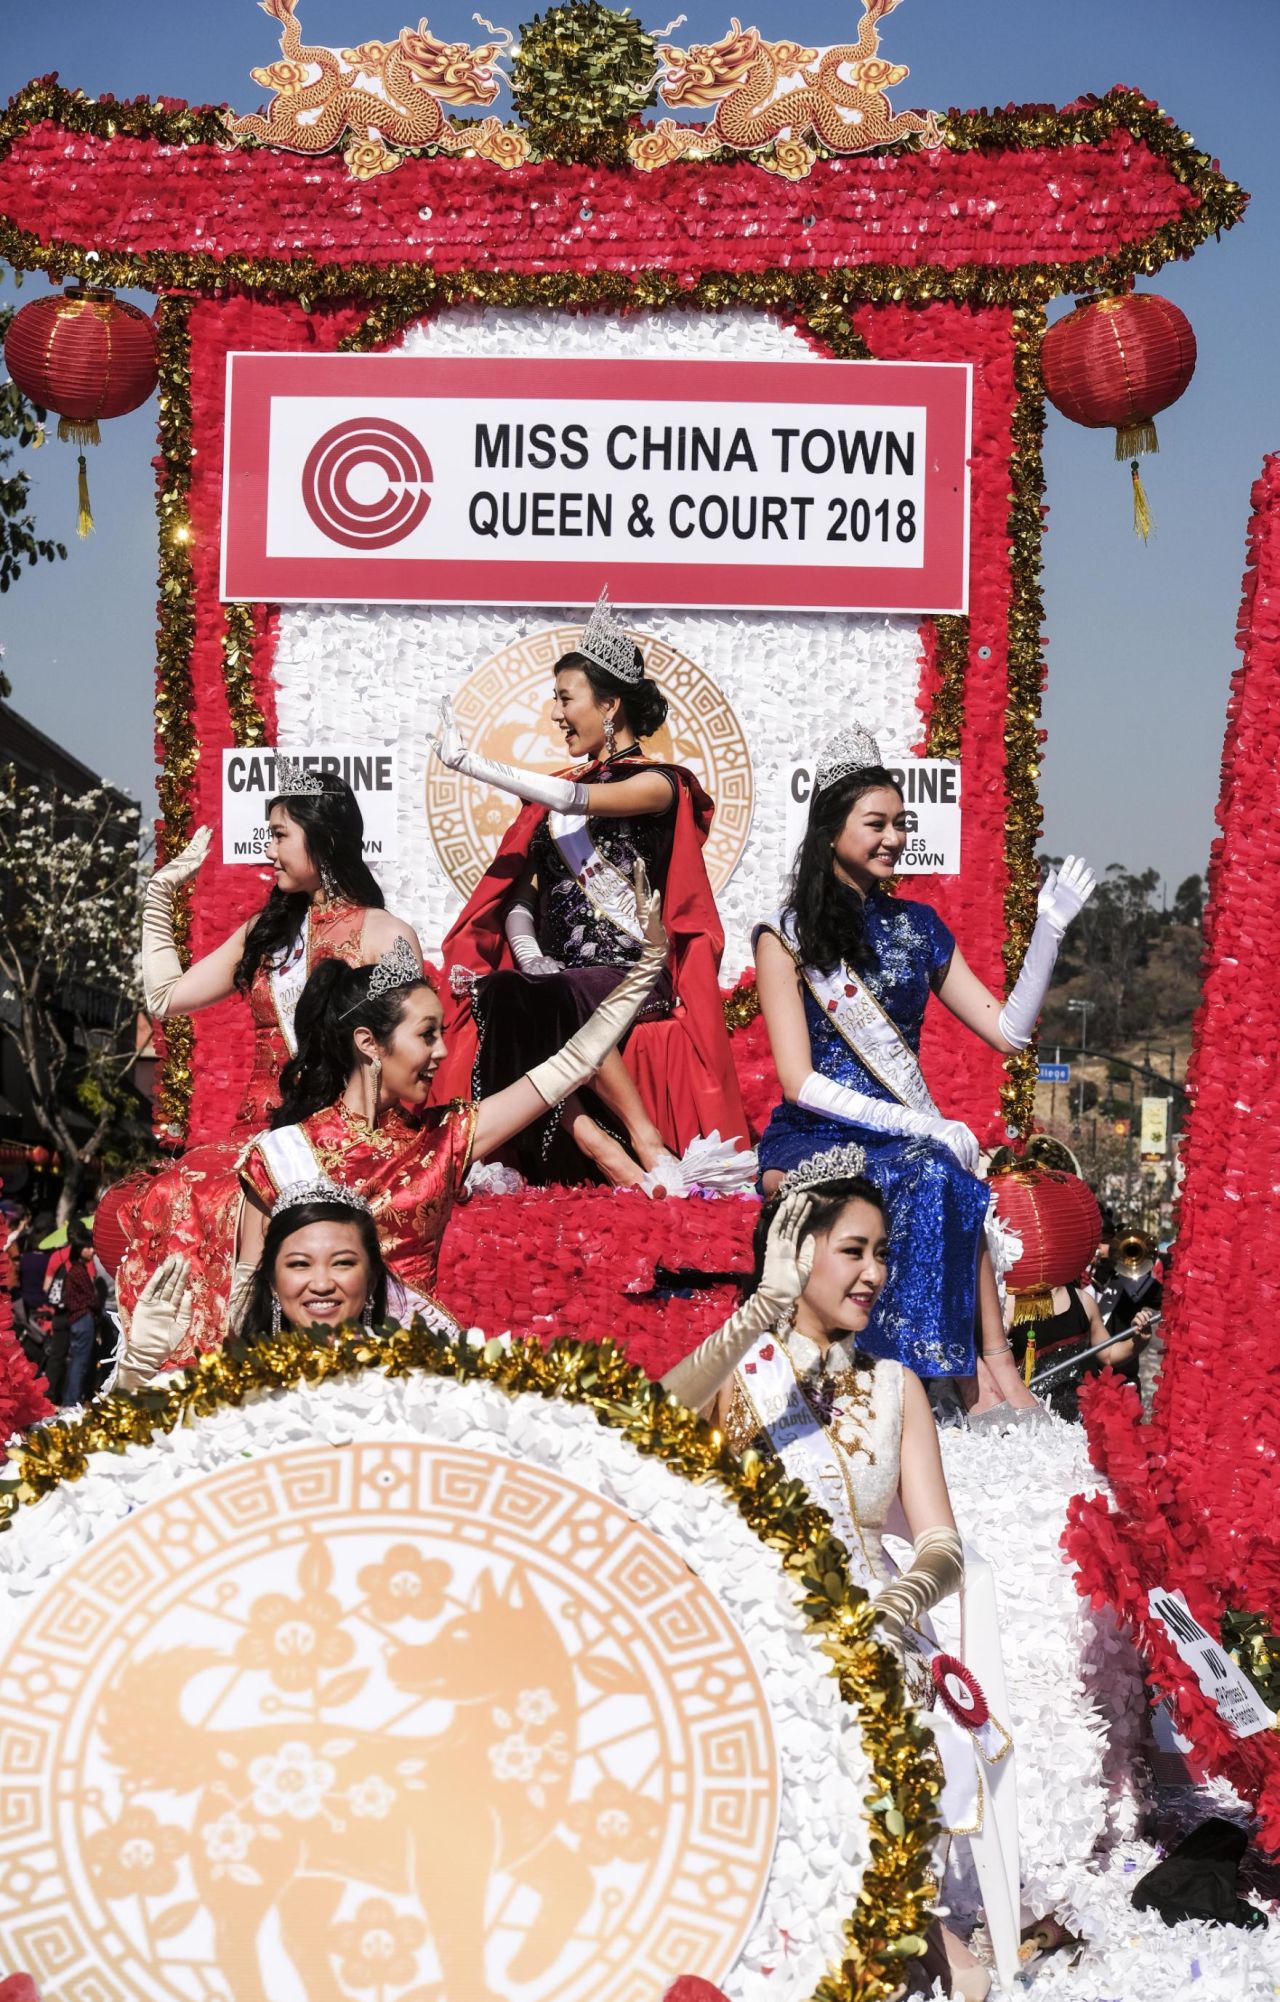 Miss Chinatown Queen and Court ride their float during the 119th annual Chinese New Year ''Golden Dragon Parade'' in the streets of Los Angeles' Chinatown in 2018.